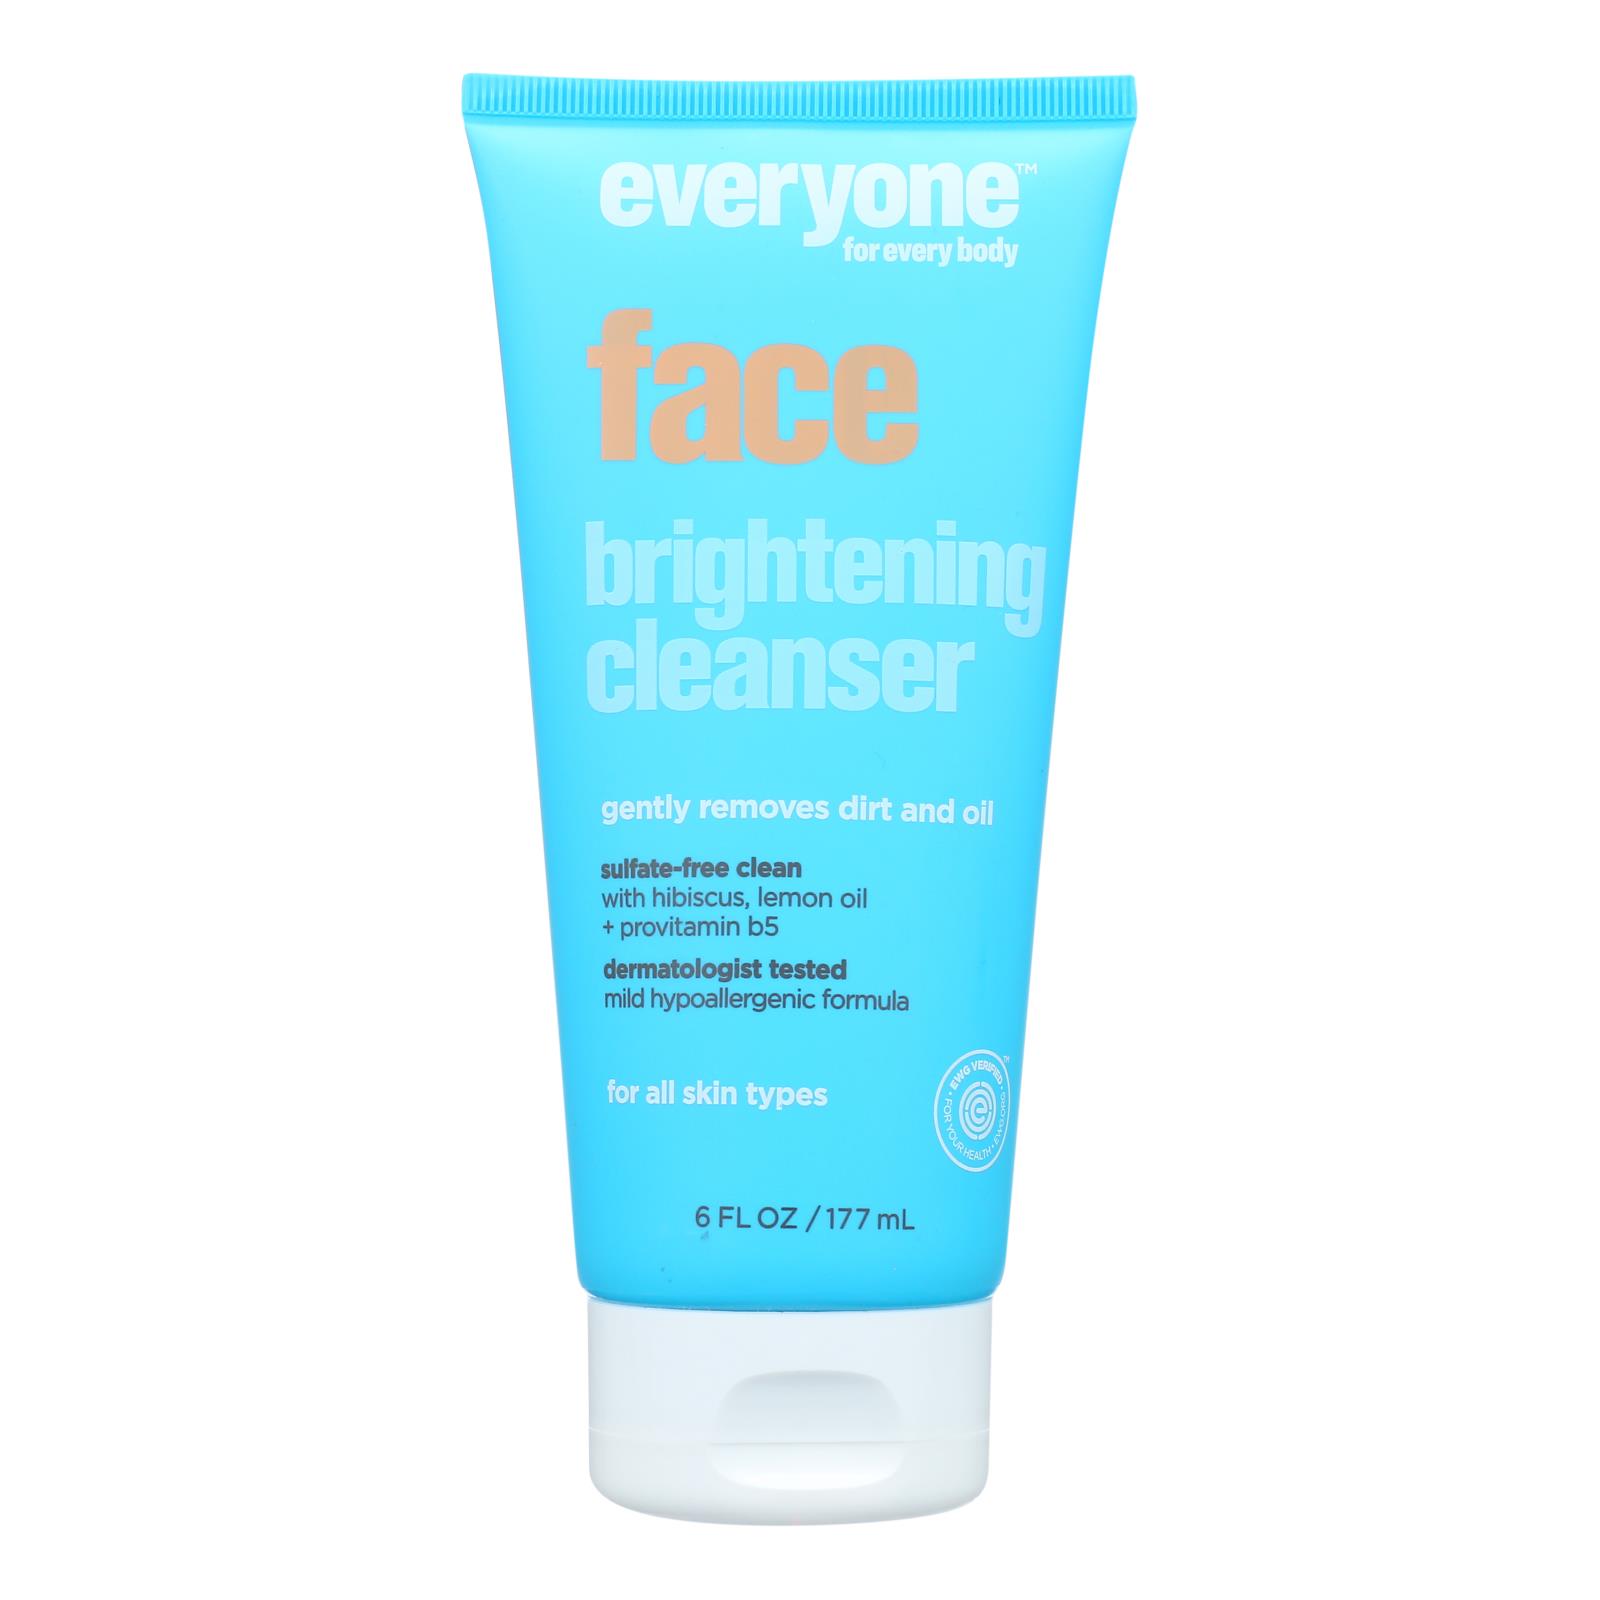 Everyone - Cleanser Face Brightening - 6 FZ